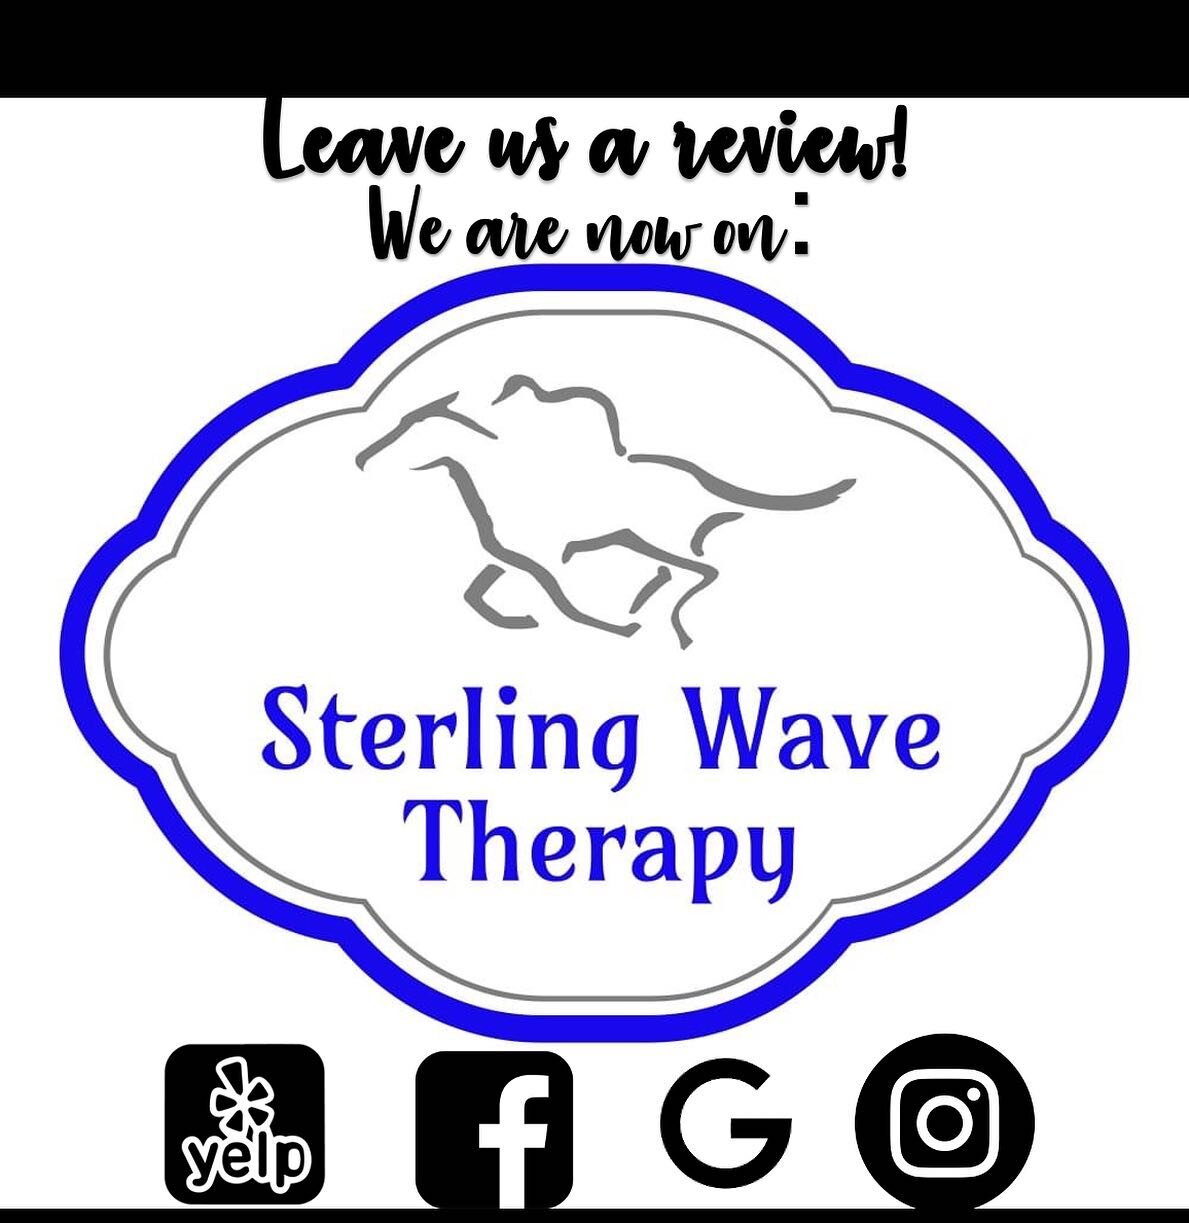 If you&rsquo;ve had an awesome experience with us please go leave us a review! 🥰🤗
&bull;
&bull;
&bull;
&bull;

#therapy #healing #equine #humans #pets #painless #recovery #relaxing  #PMEF #sterlingwave #strelingwavetherapy #depressiontreatmant #pai